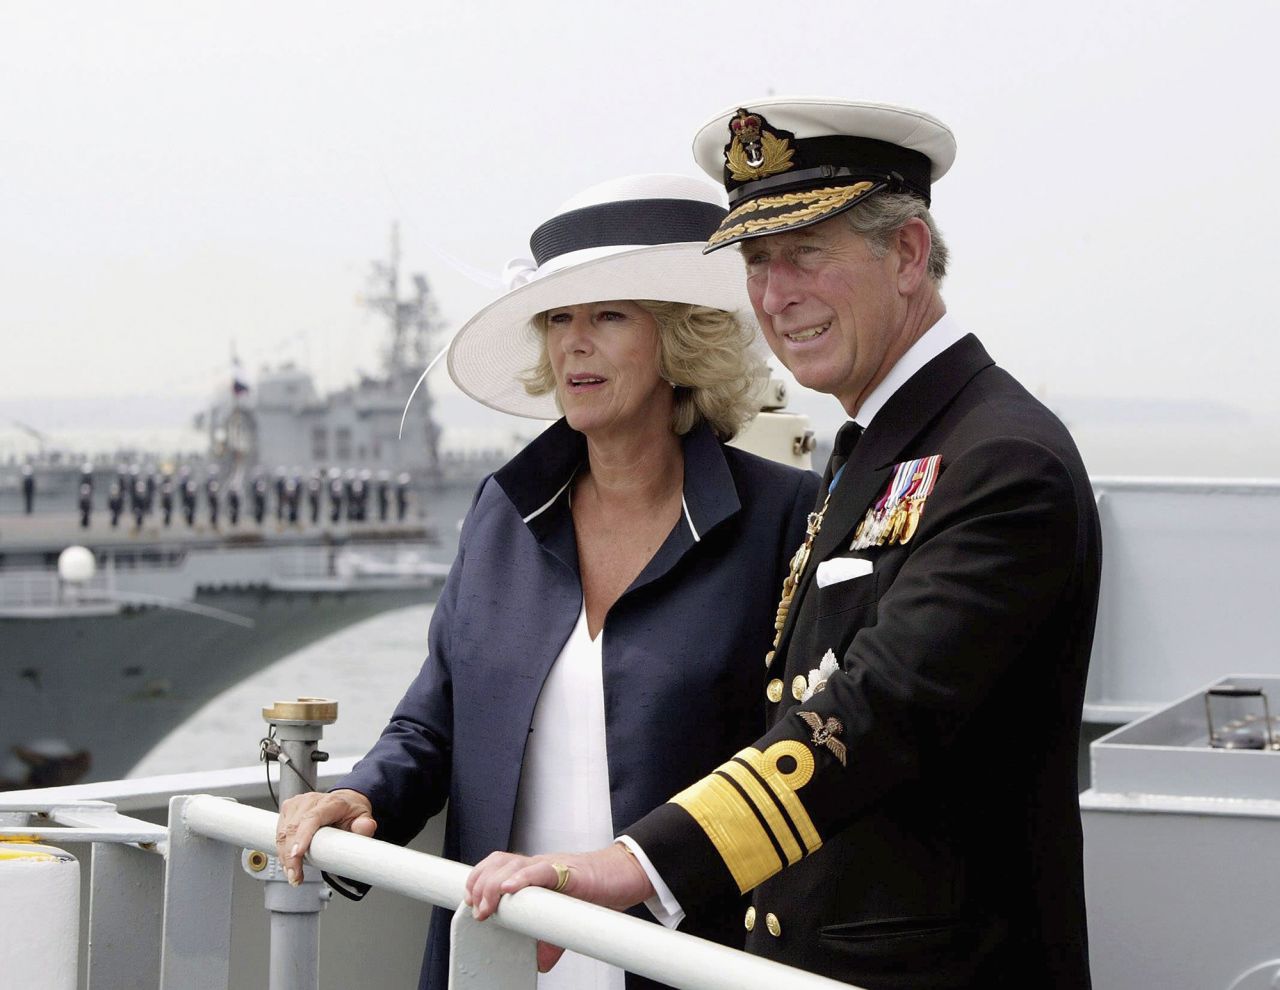 Charles and Camilla stand on the deck of HMS Scott in Portsmouth, England, in June 2005. It was the 200th anniversary of the Battle of Trafalgar.